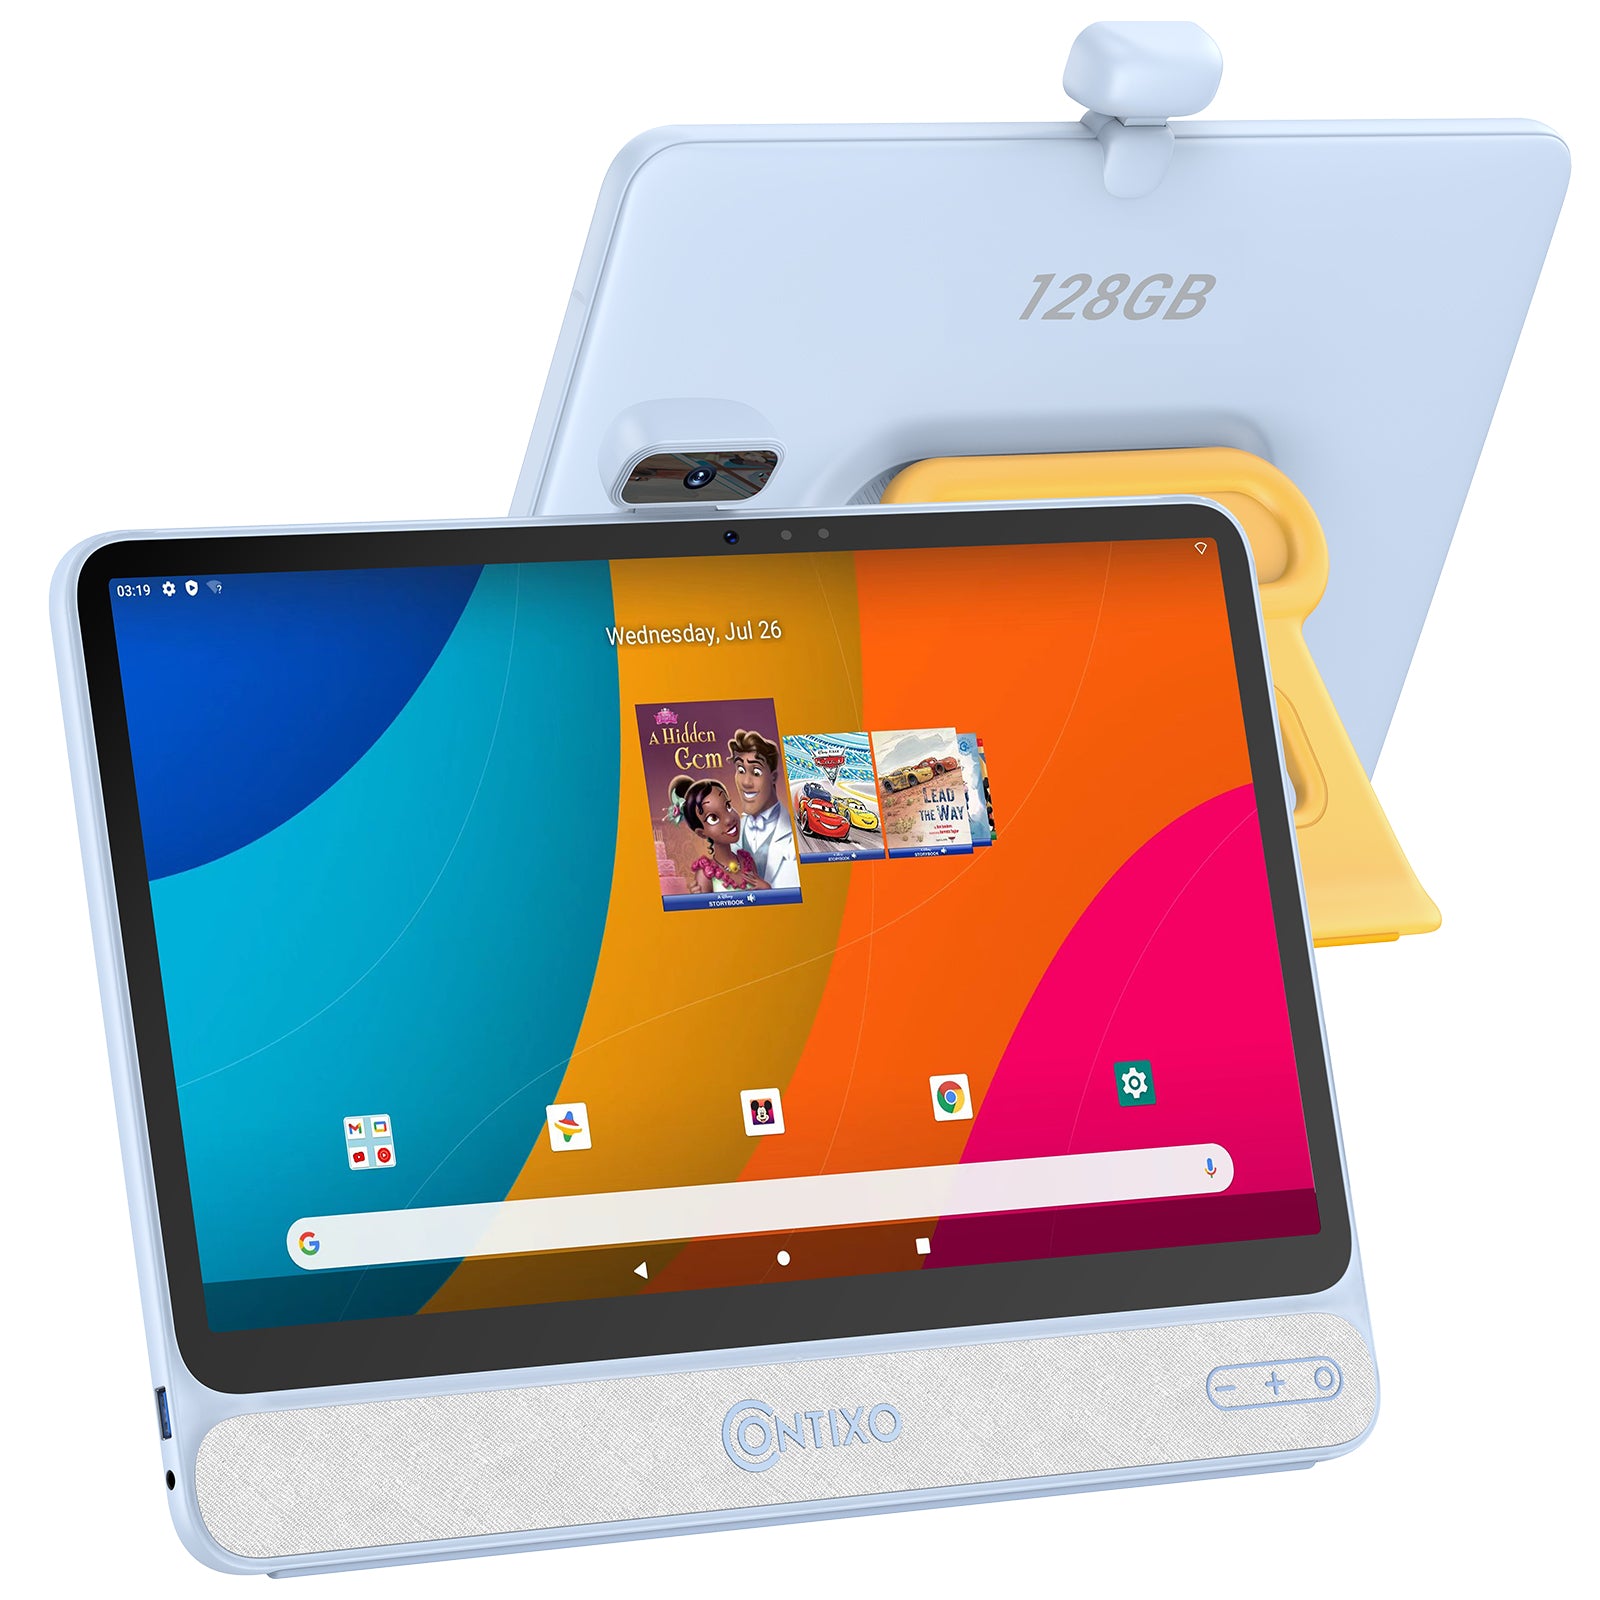 Contixo A3 15.6" Educational Android Tablet With 13MP Camera